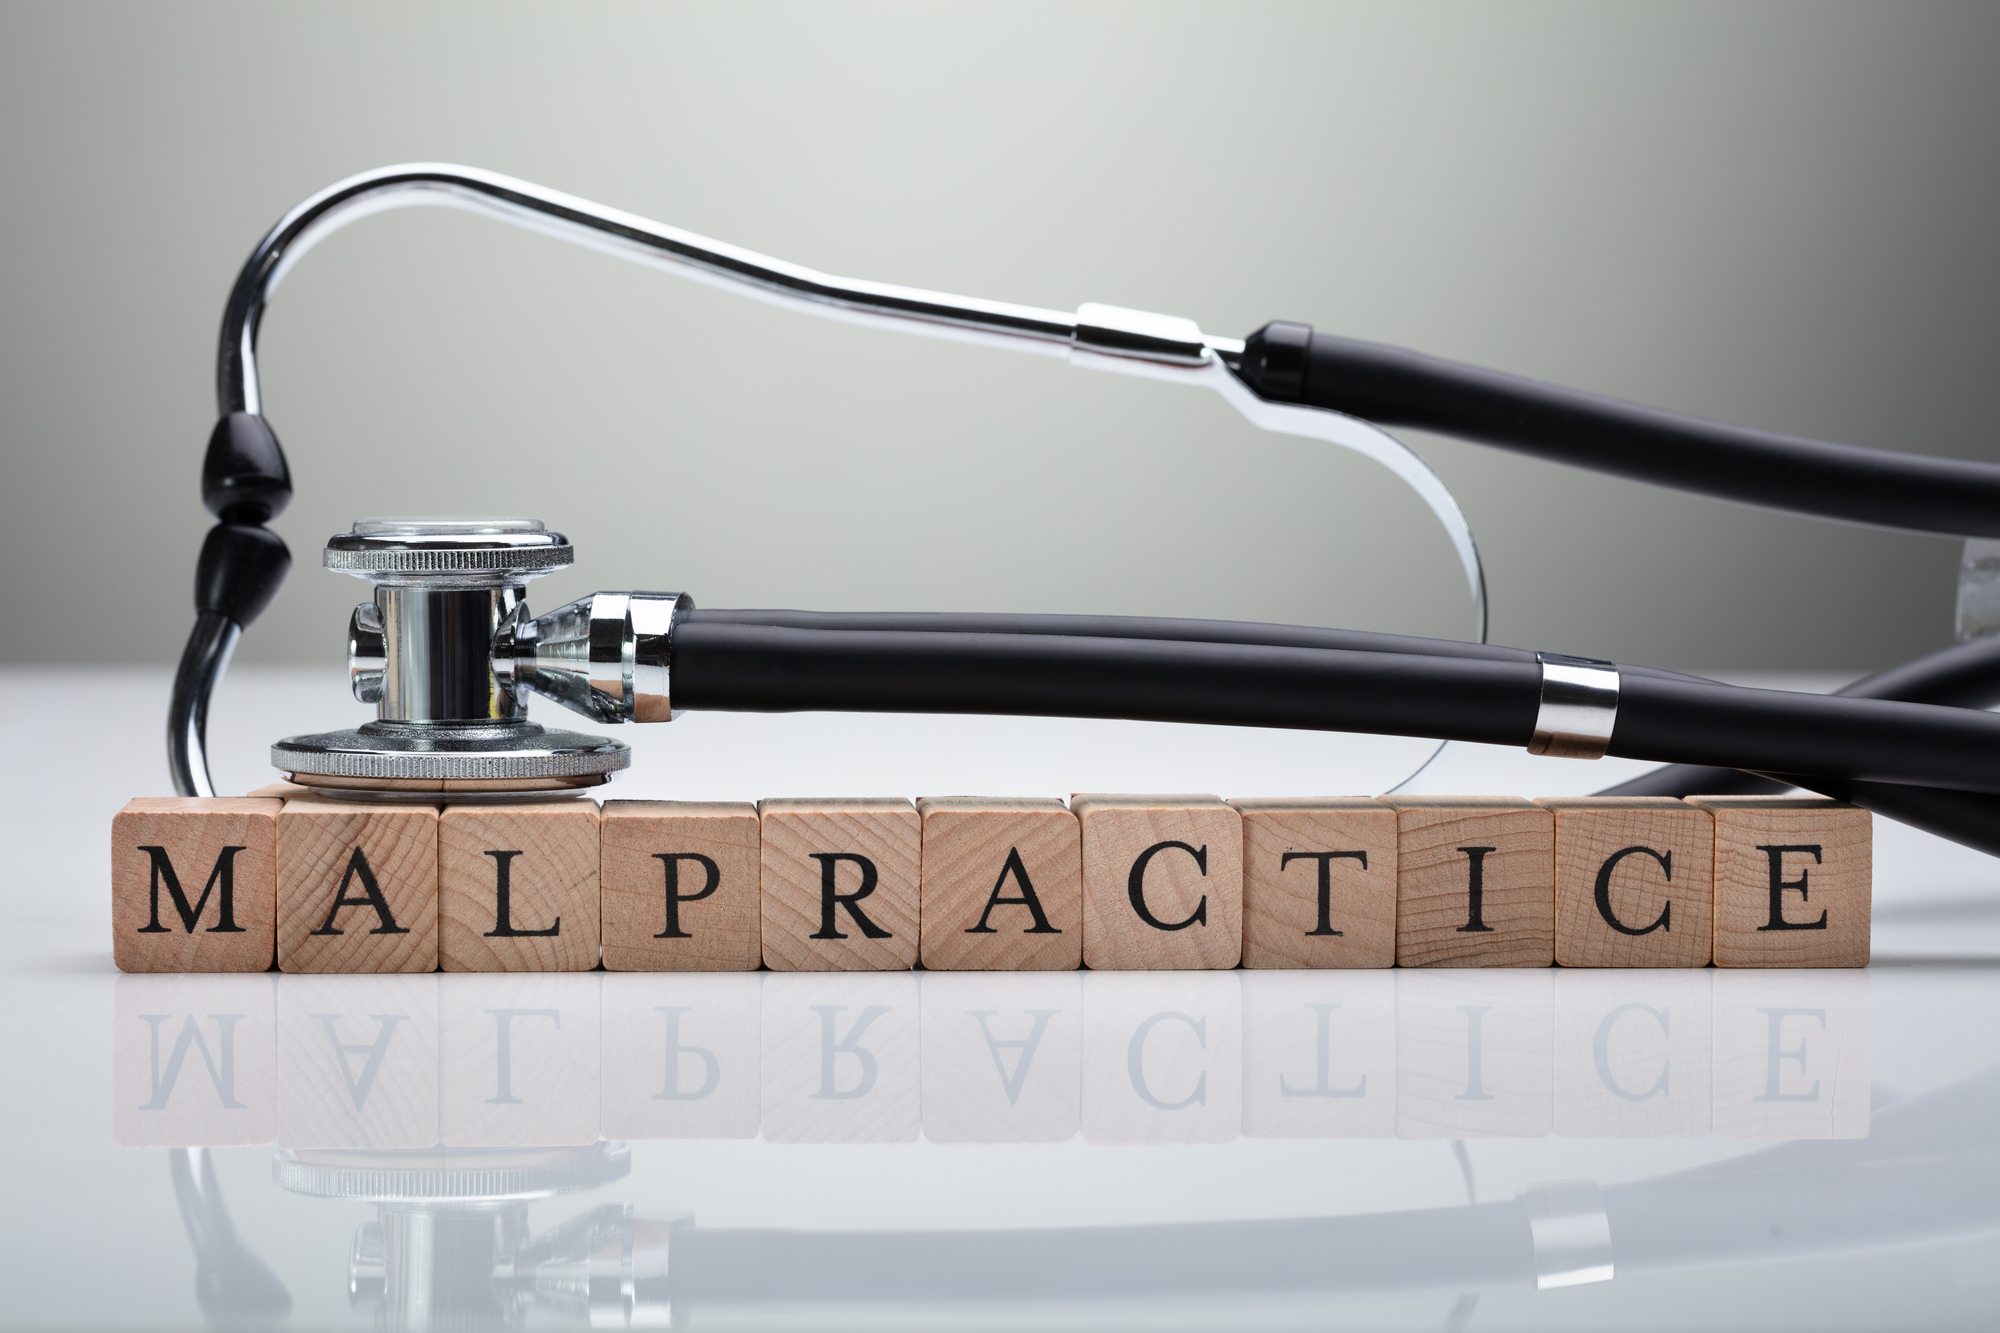 Stethoscope Over Malpractice Wooden Block On White Desk In Front Of Gray Background